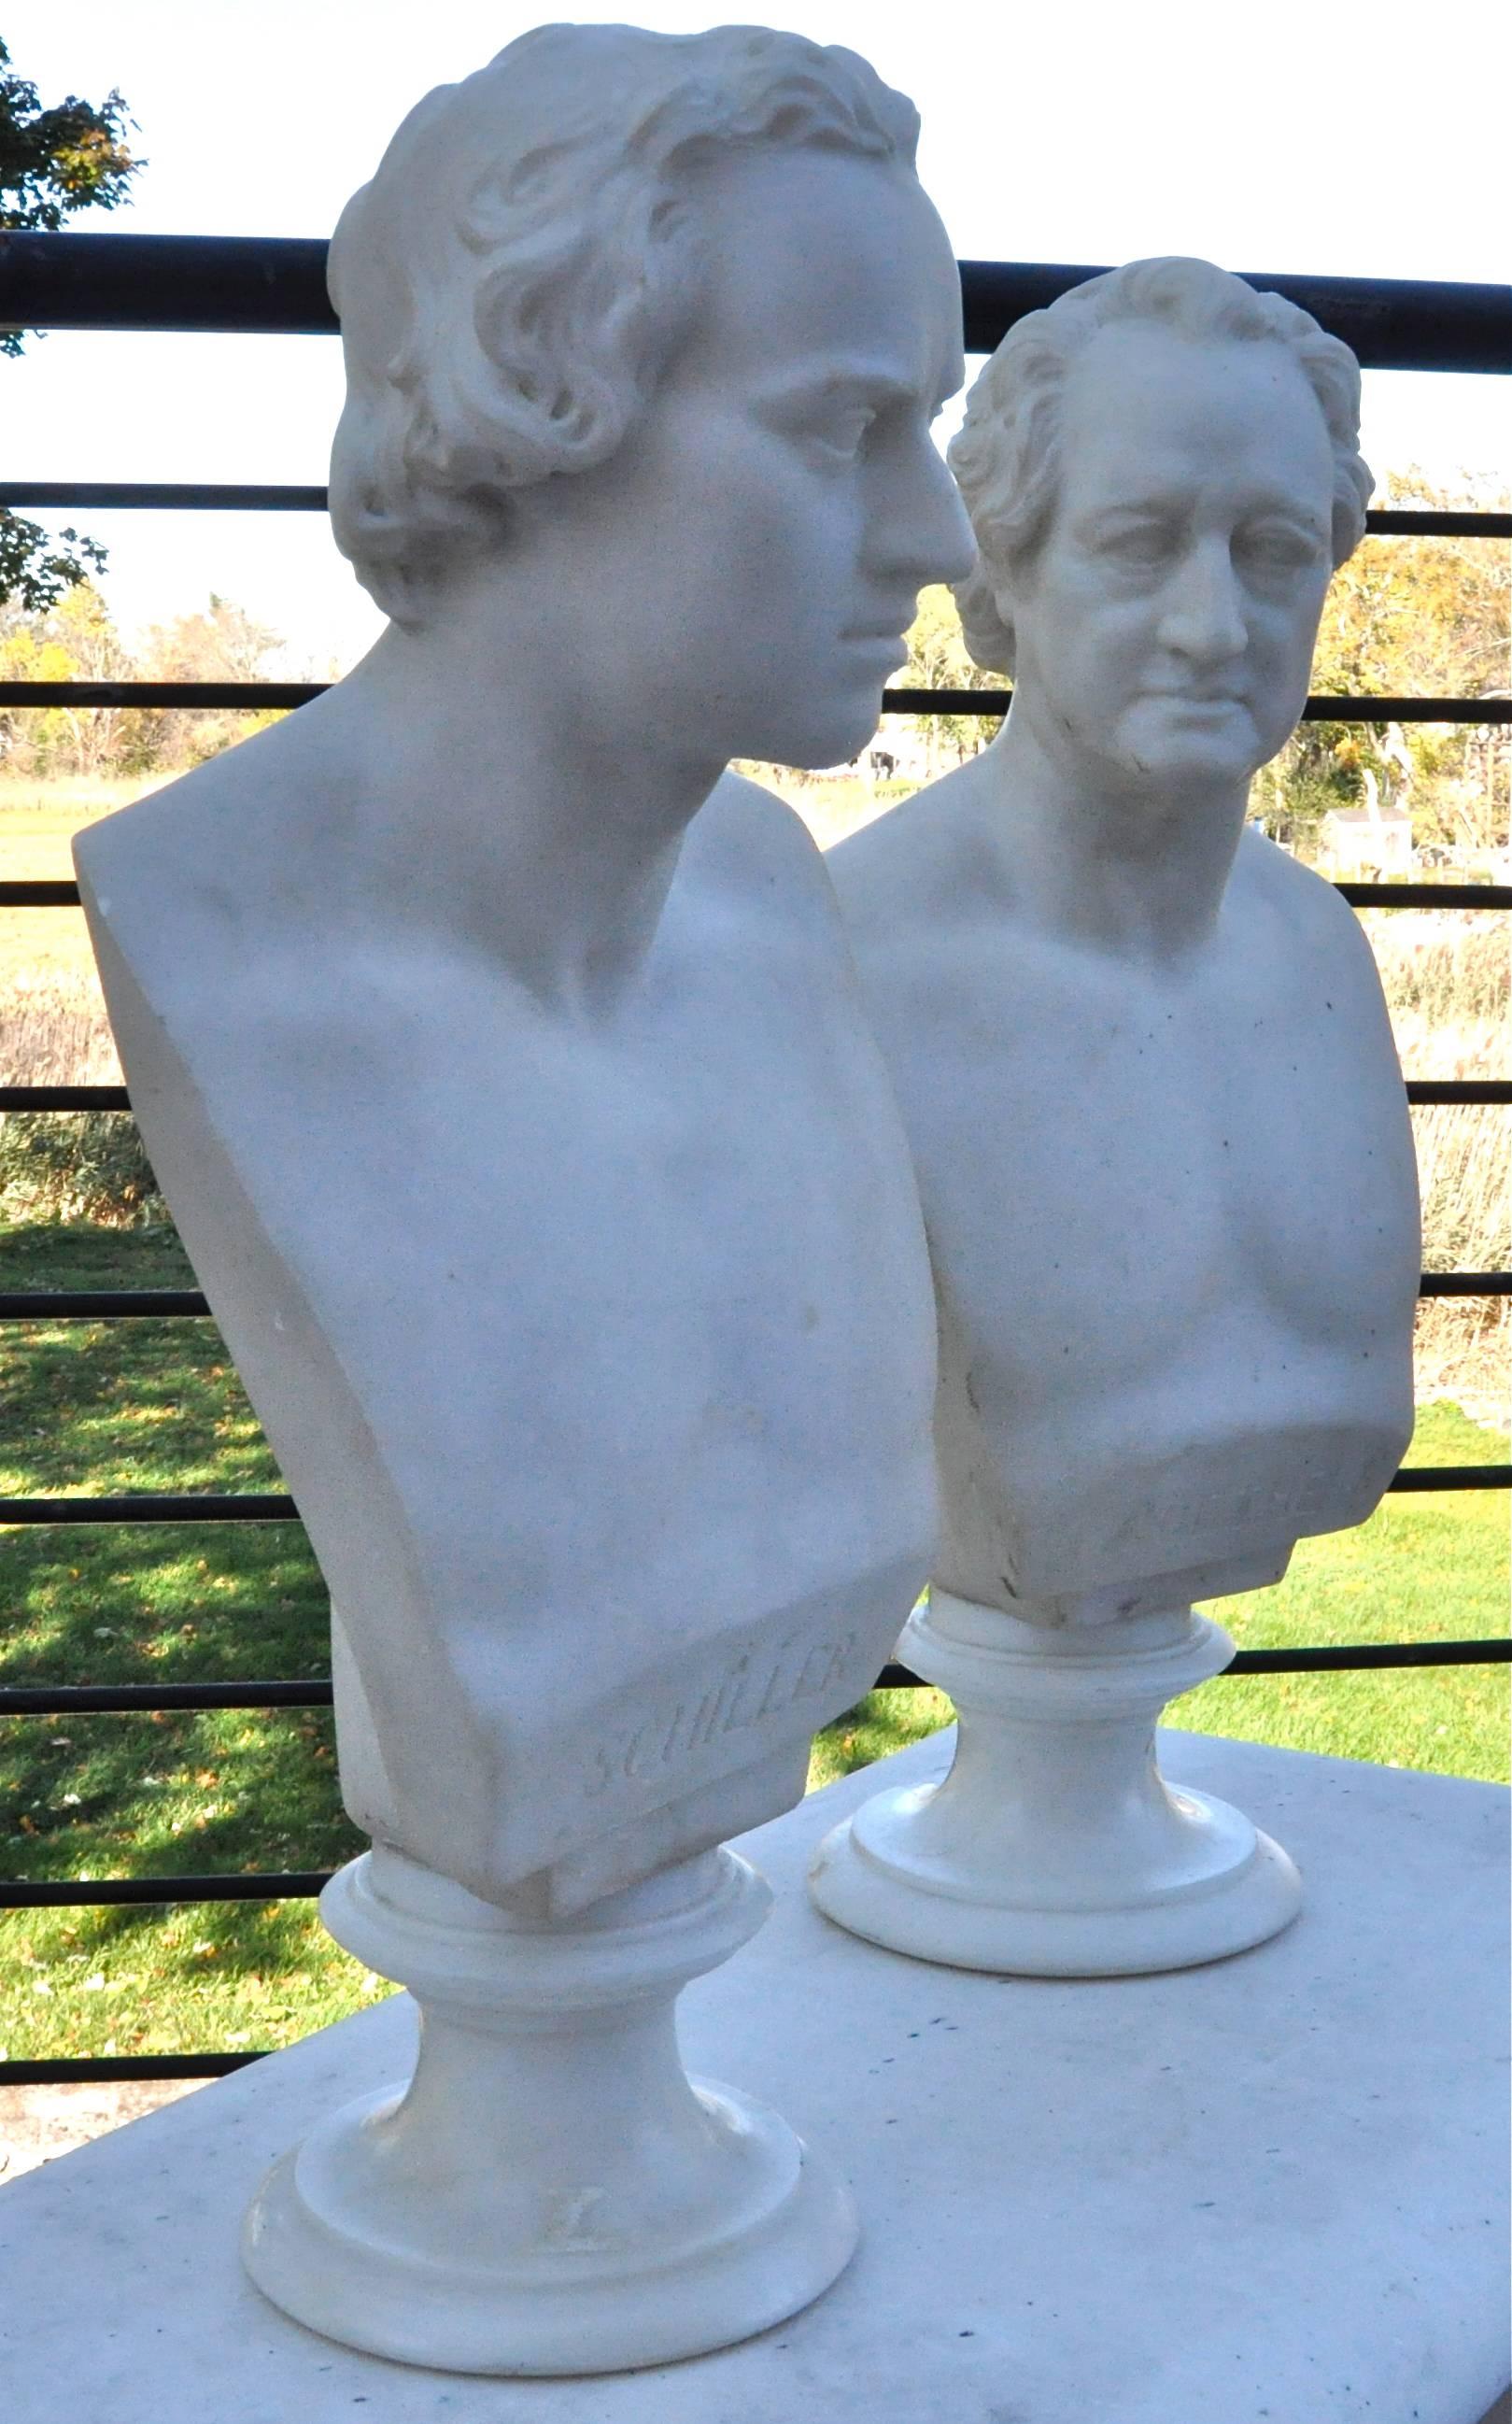 Pair of well carve marble busts of Johann Goethe Friedrich Schiller.

Second quarter of the 19th century.
One marked 